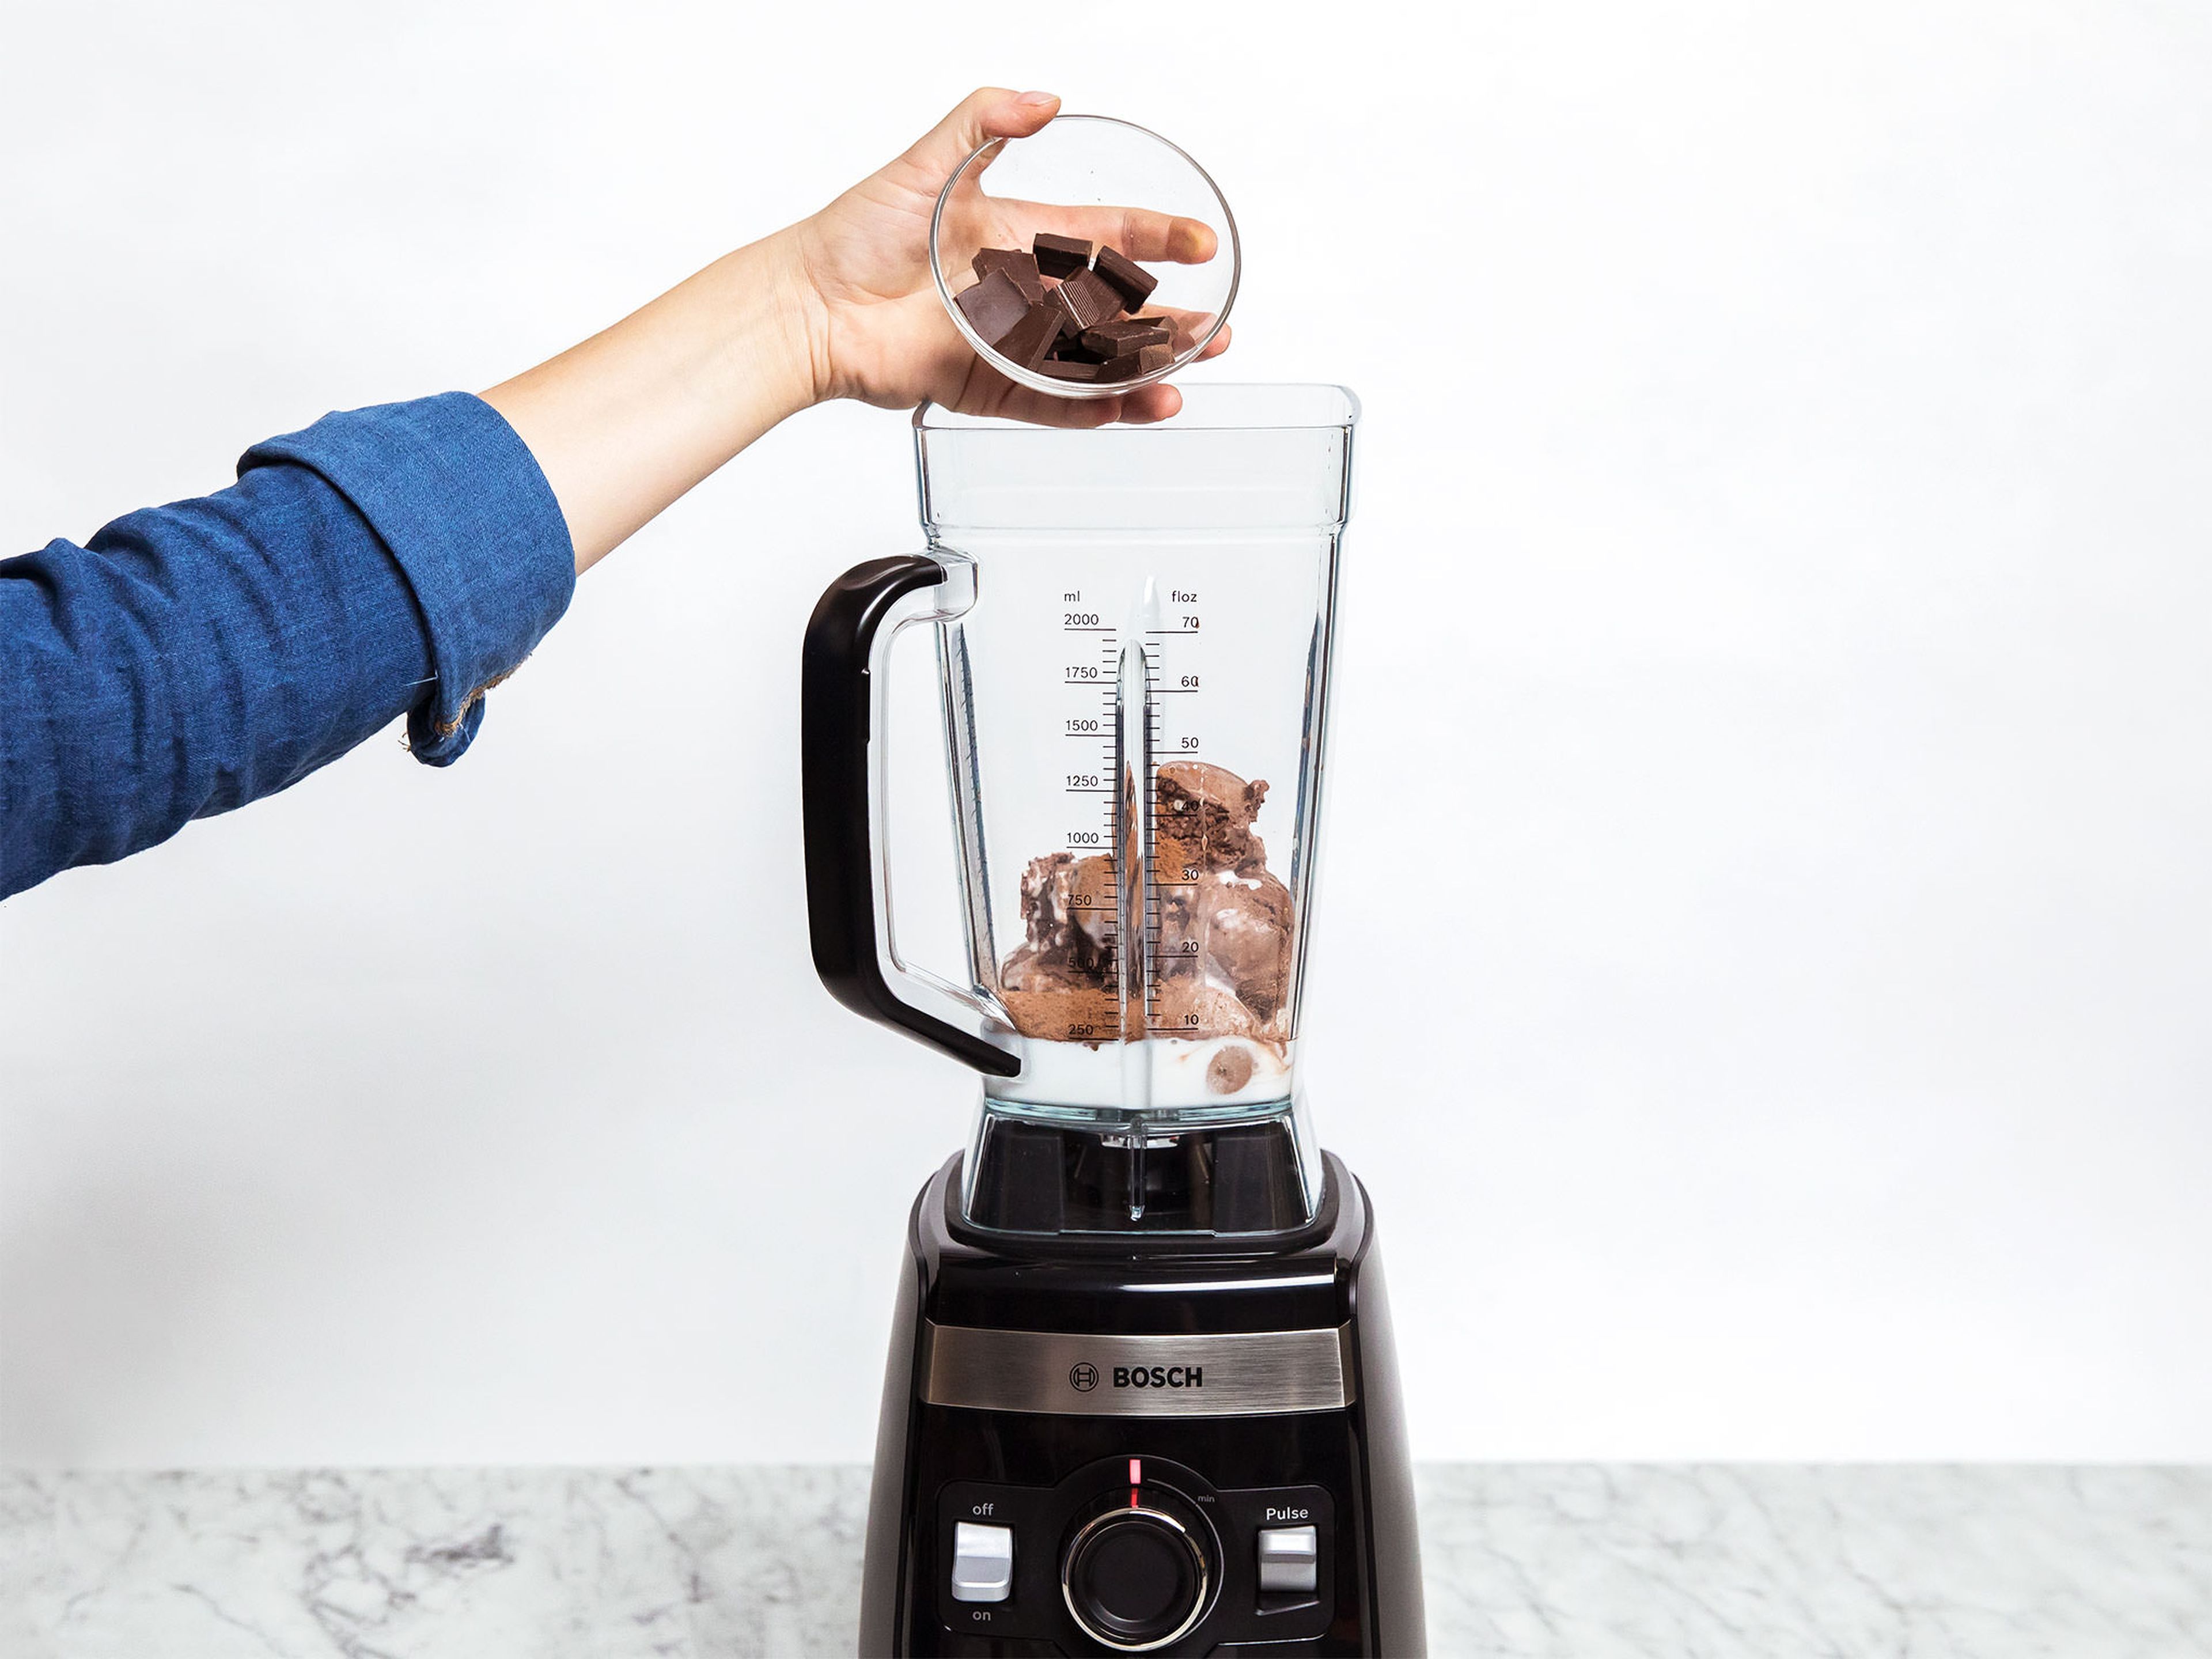 Add chocolate ice cream, coconut milk, unsweetened cocoa powder, and bittersweet chocolate to the blender and blend until smooth (using your blender's shake function).